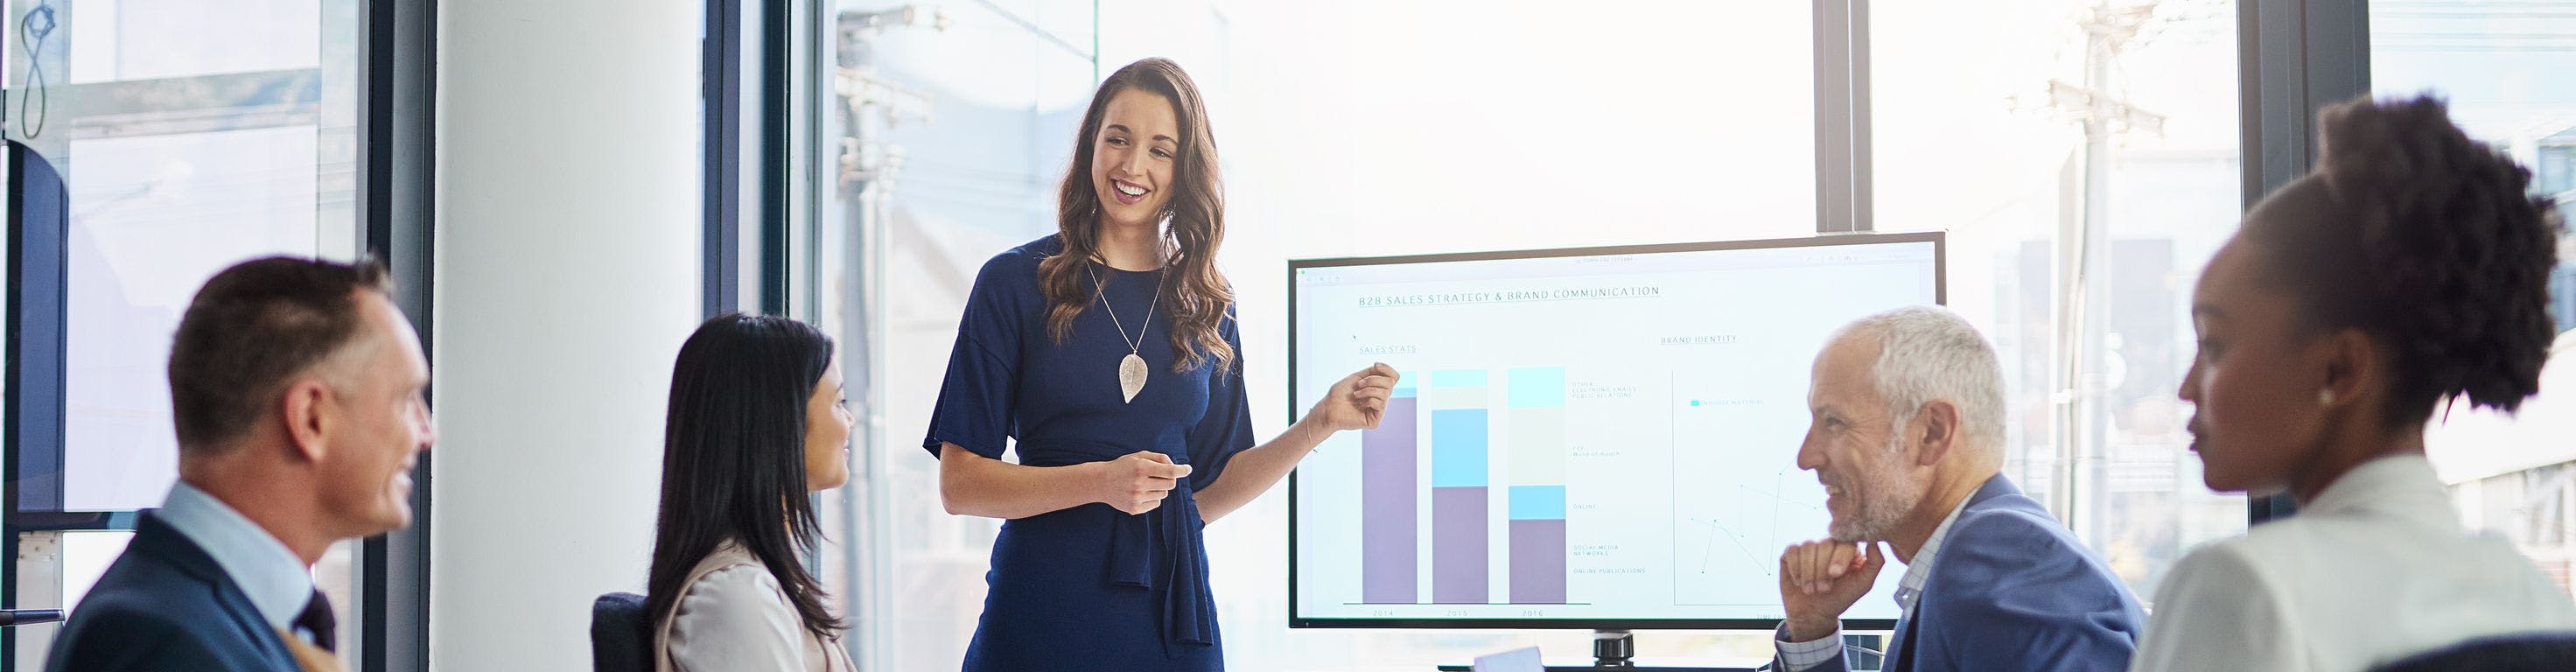 Woman presenting a bar chart graph on a screen in a bright windowed office